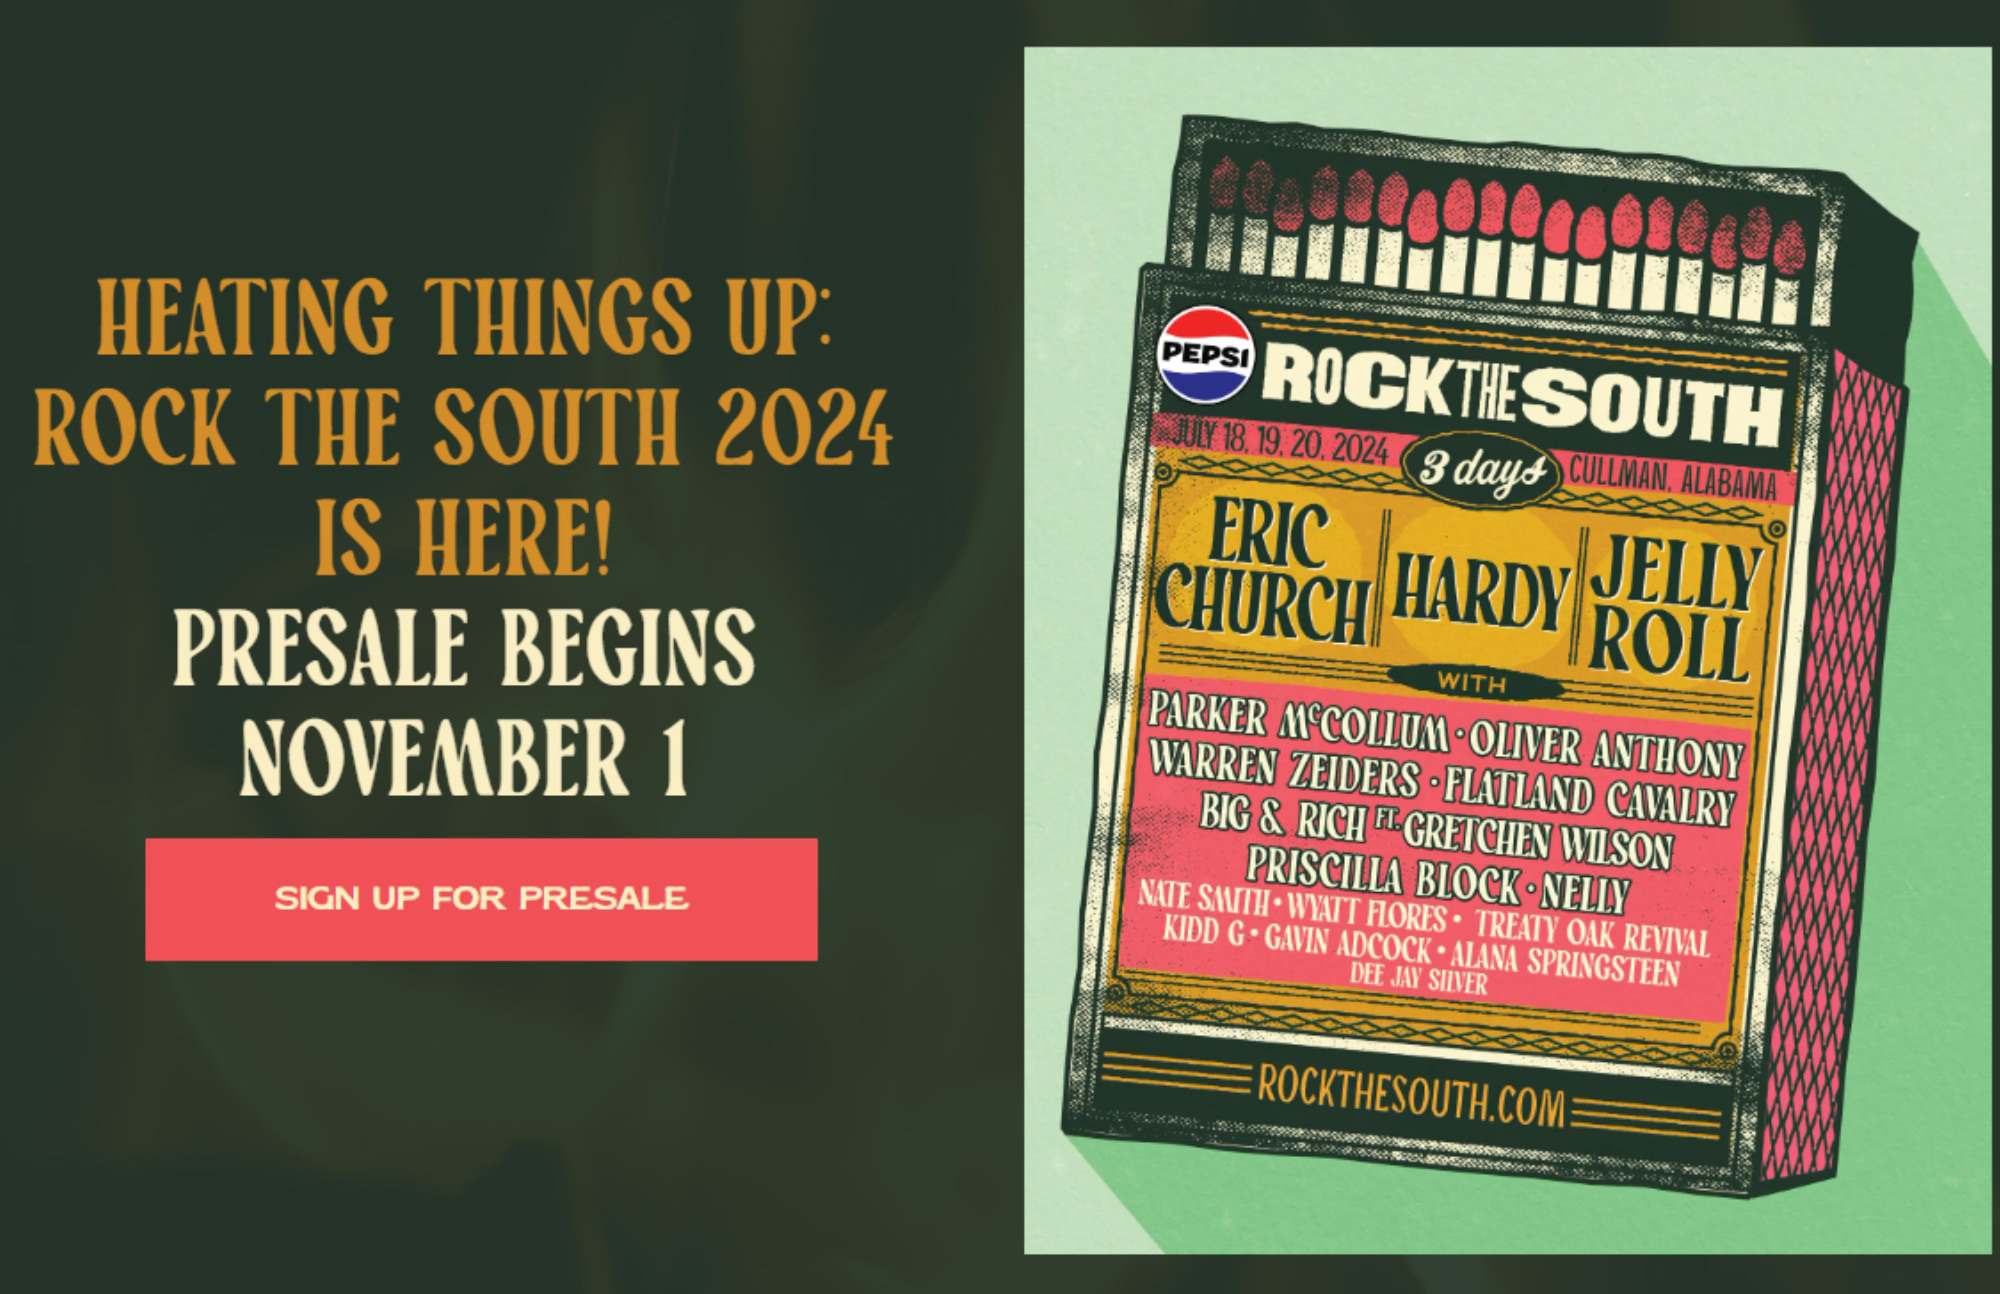 Rock the South 2024 lineup announced